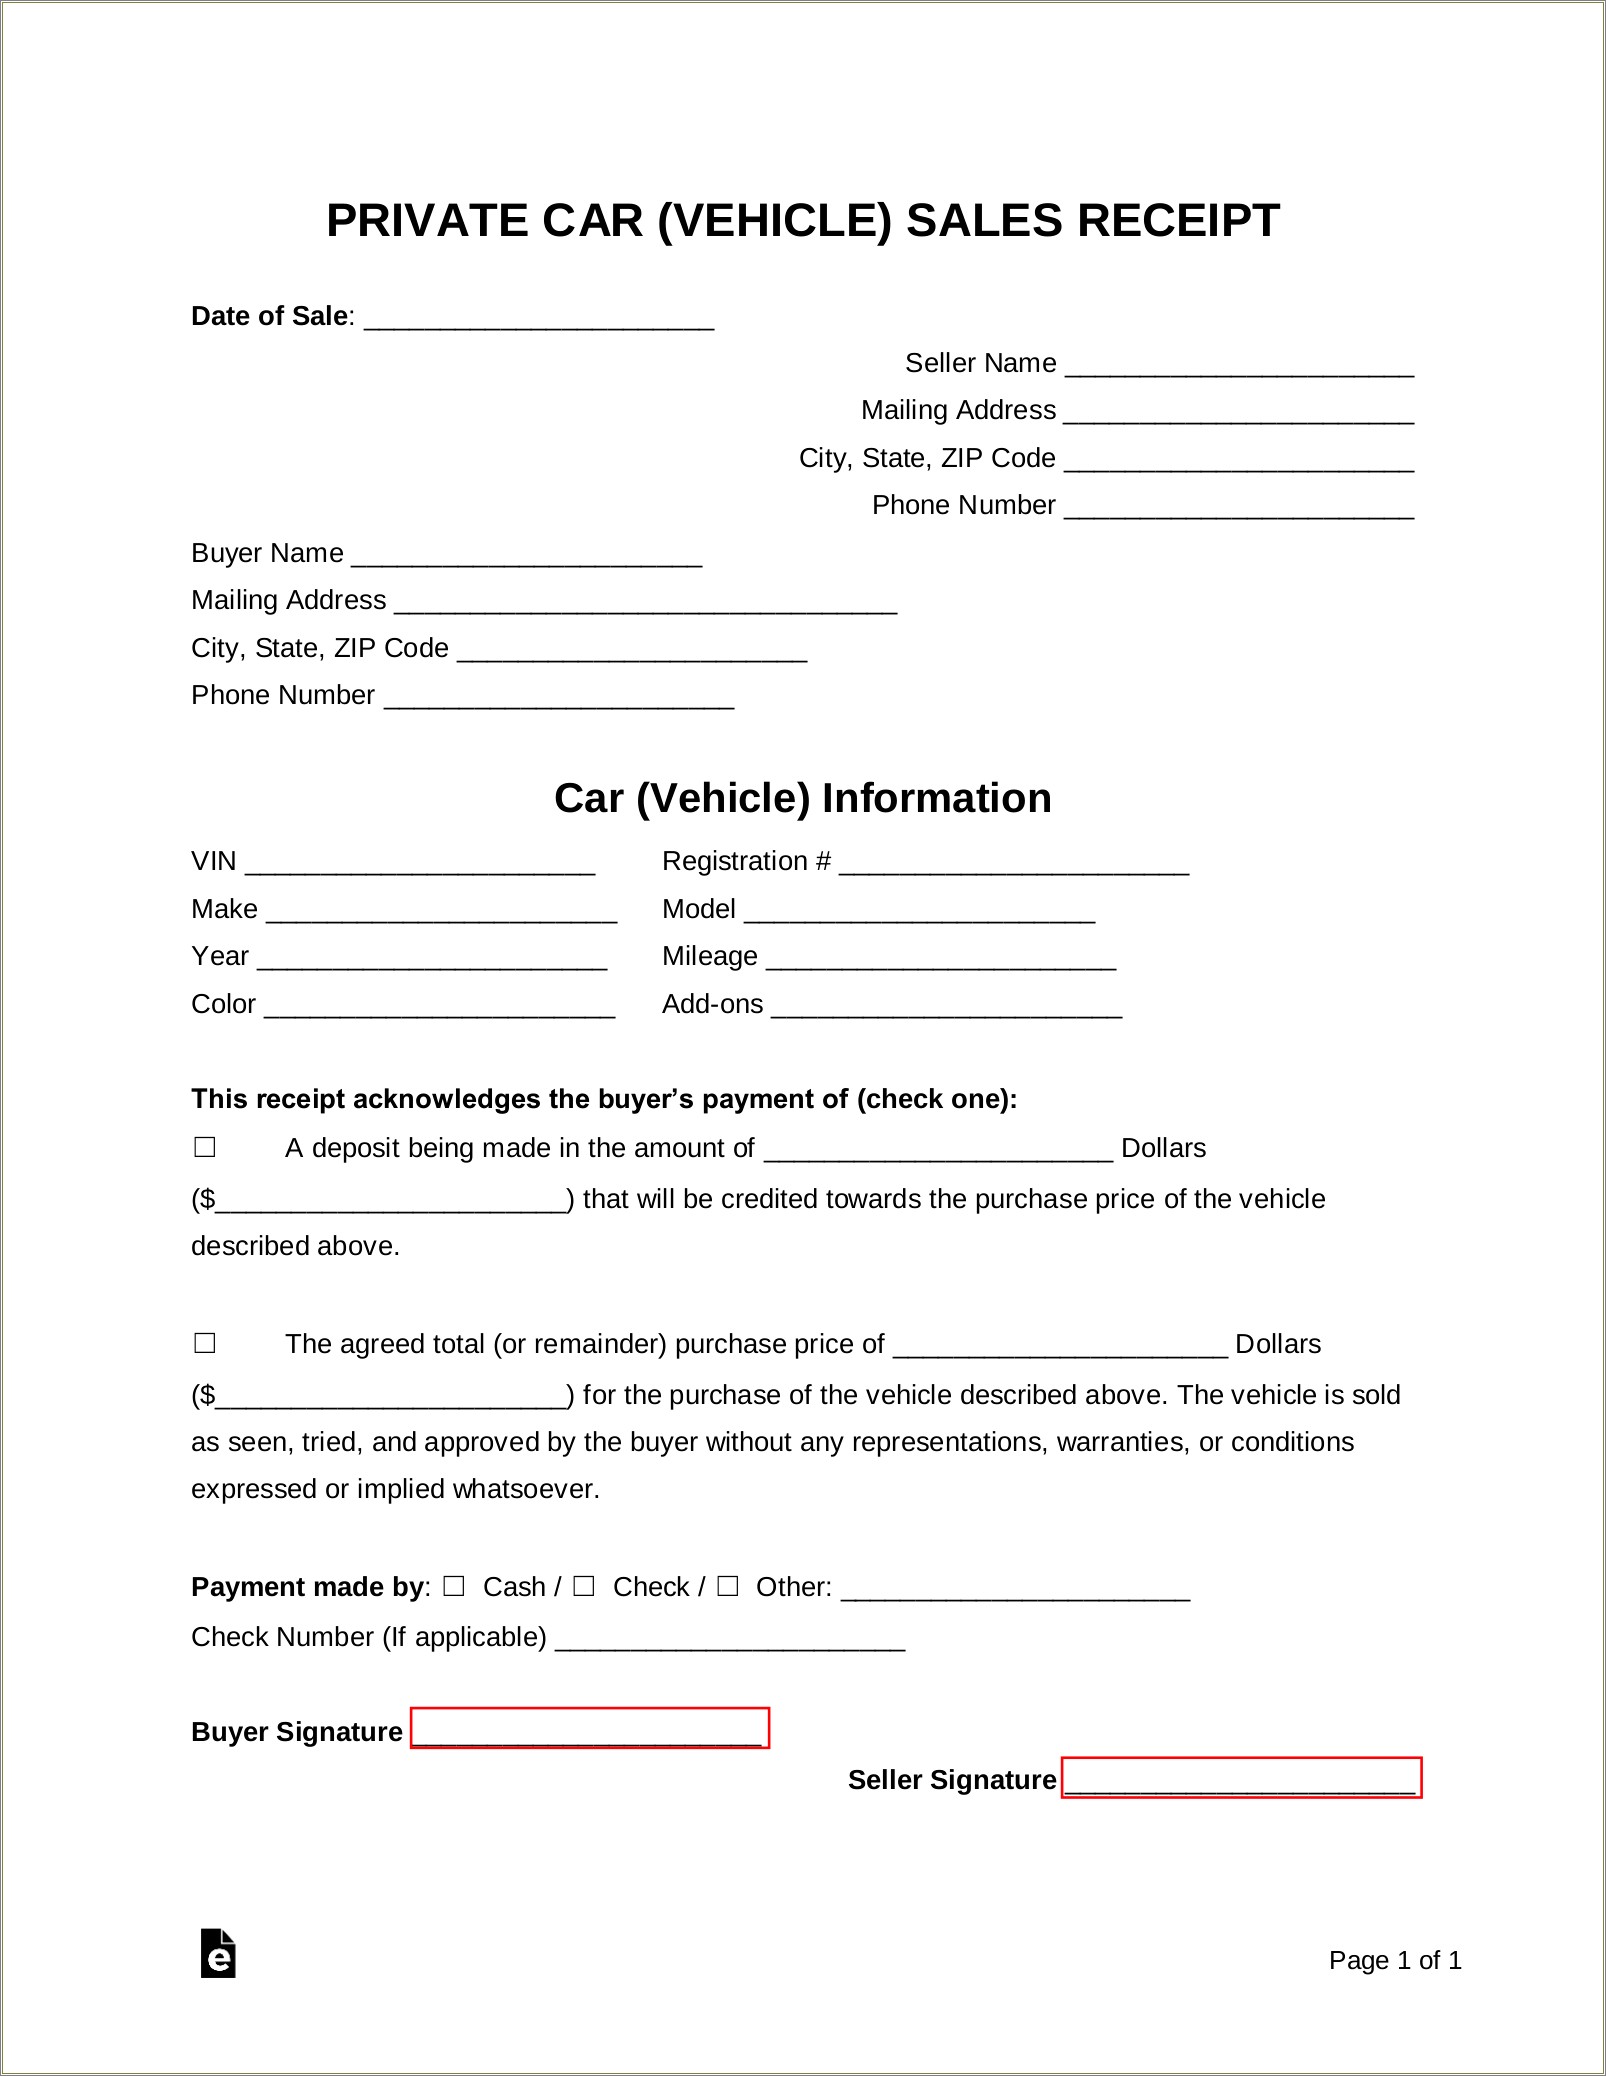 free-car-sale-contract-with-payments-template-resume-example-gallery